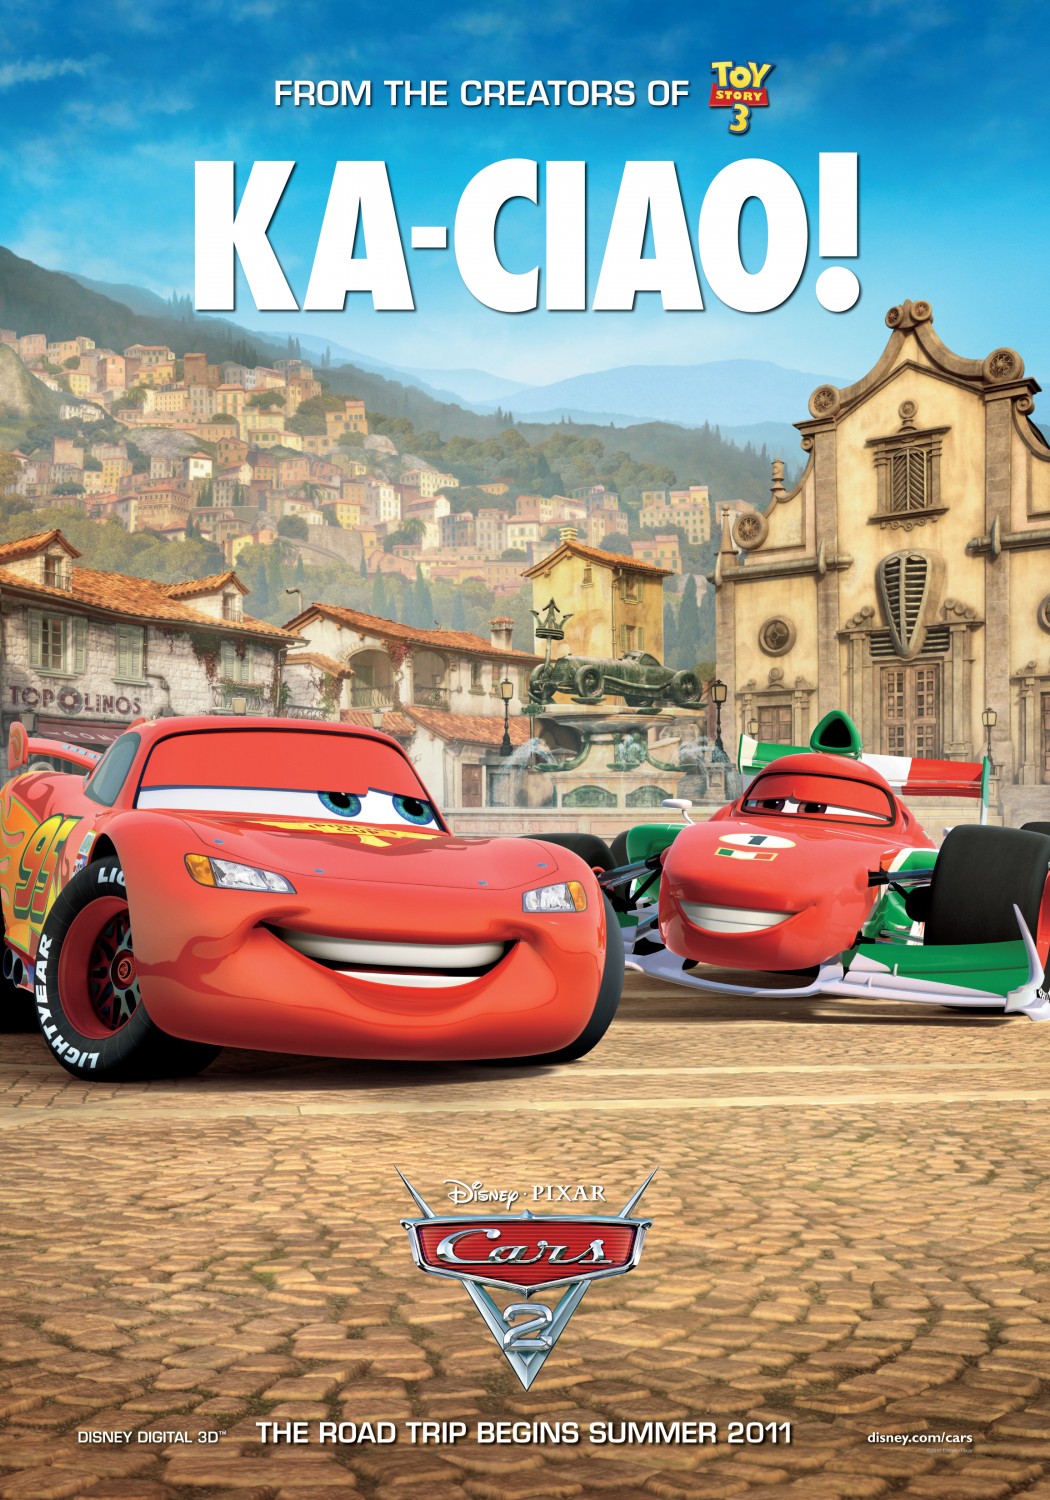 Extra Large Movie Poster Image for Cars 2 (#11 of 18)